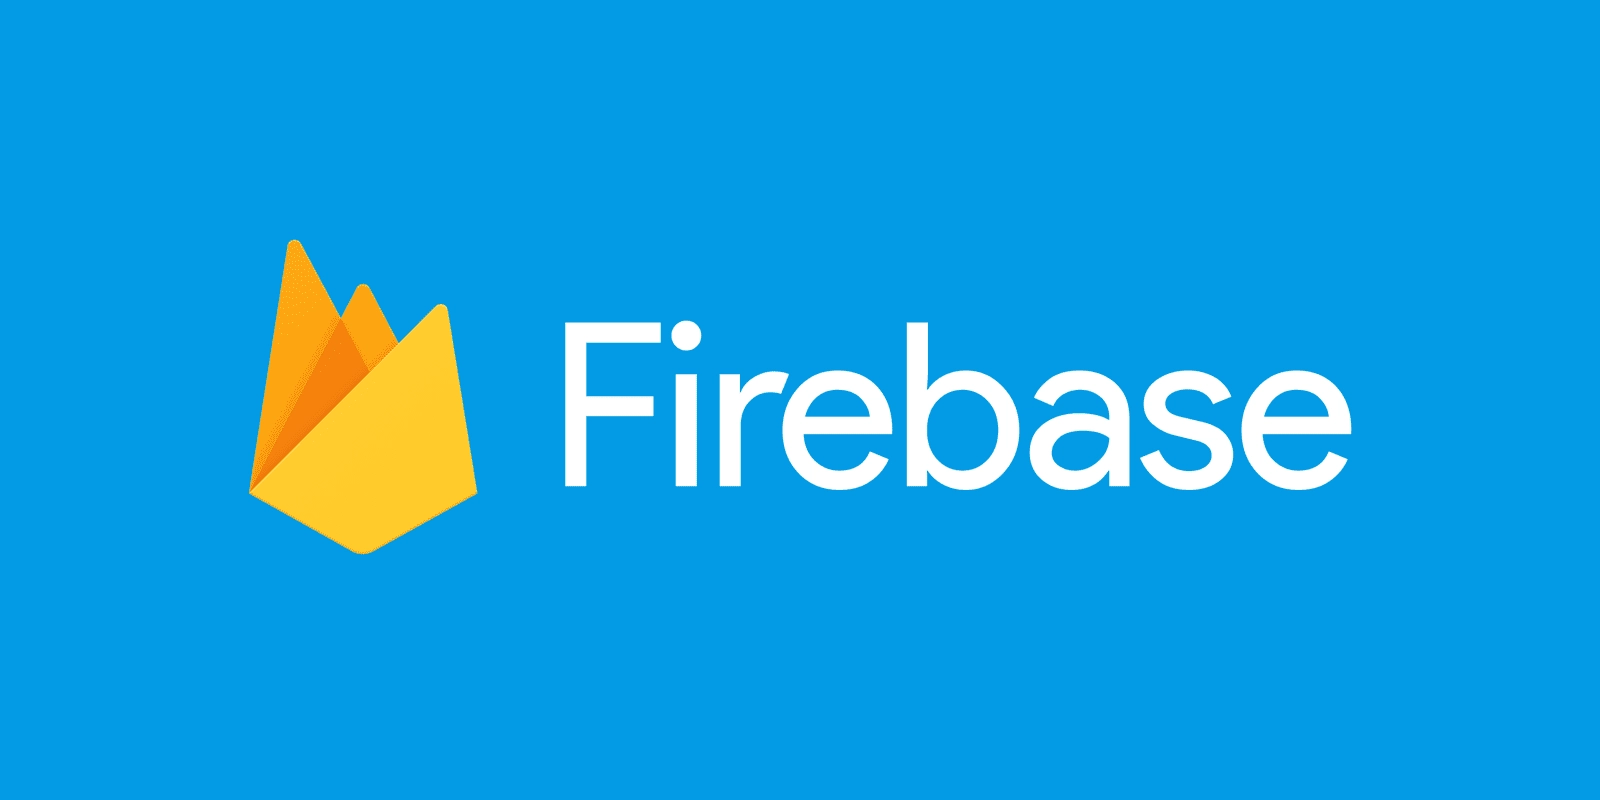 In this tutorial, you will learn how to deploy a Nuxt 3 SSR application with nuxt-vuefire to firebase hosting.